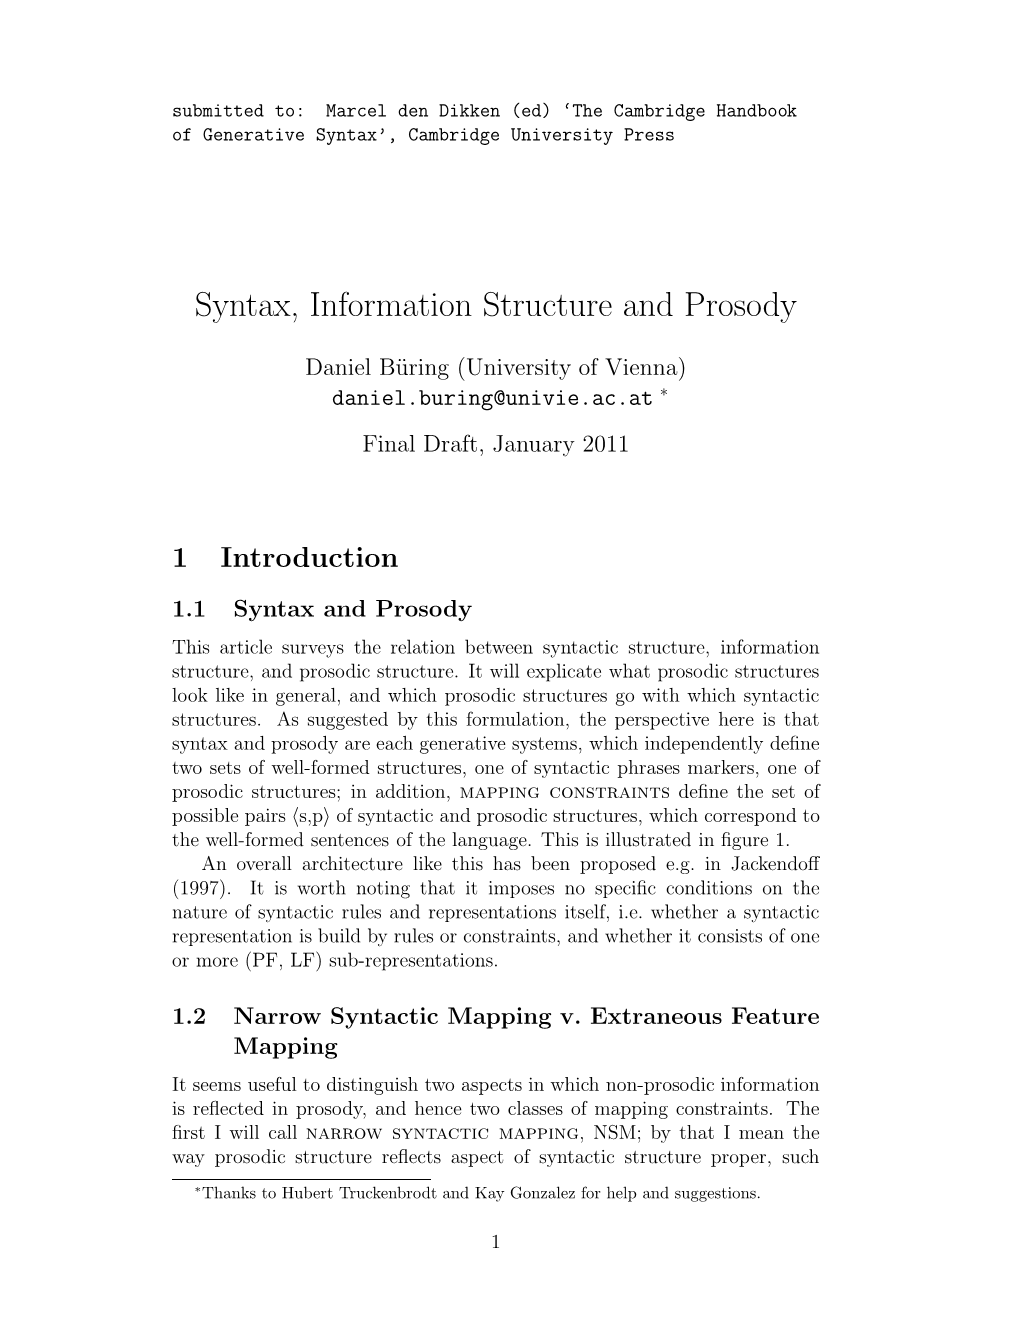 Syntax, Information Structure and Prosody